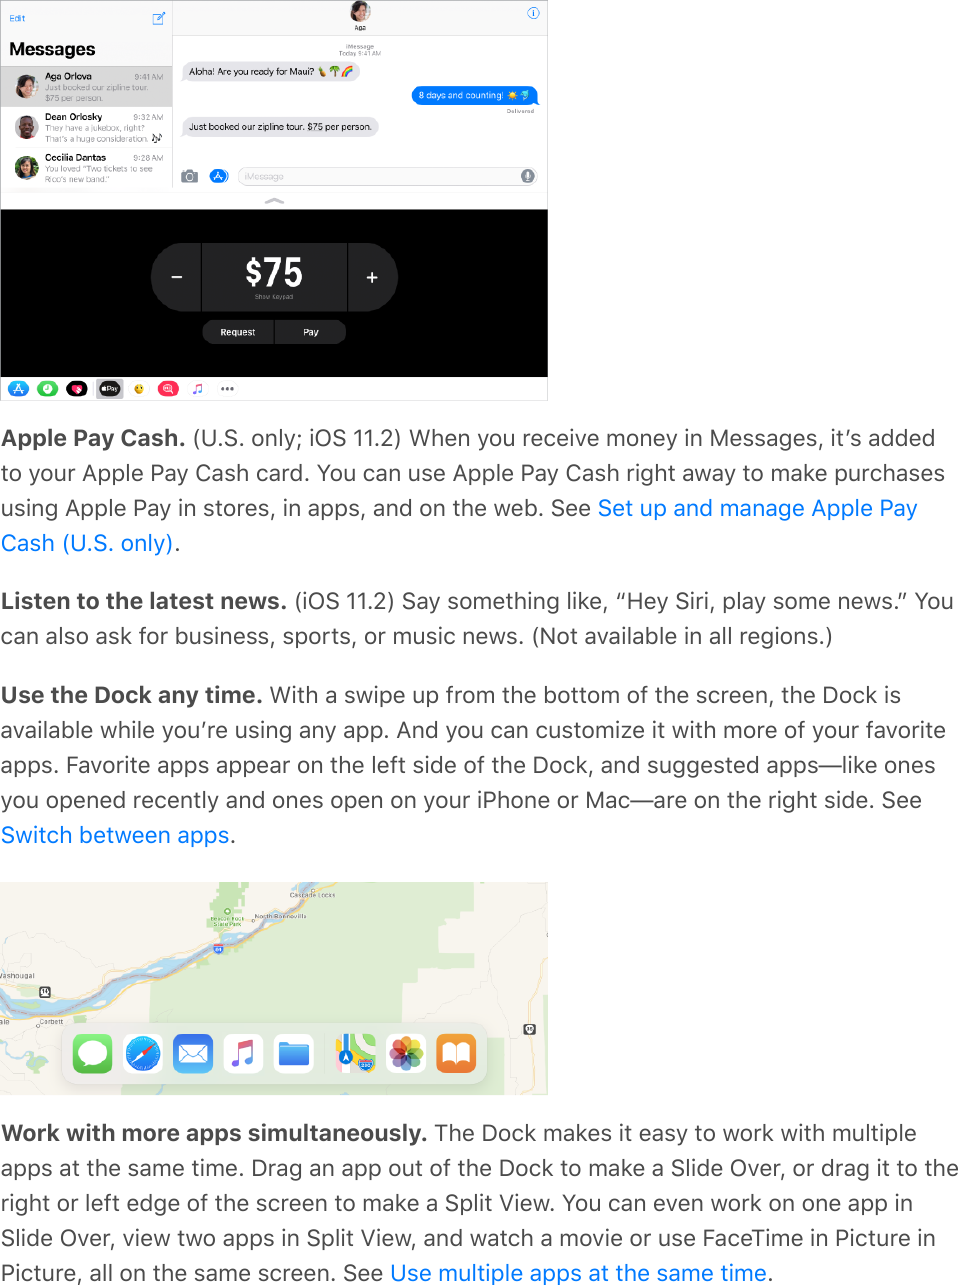 Apple Pay Cash. (U.S. only; iOS 11.2) When you receive money in Messages, itʼs addedto your Apple Pay Cash card. You can use Apple Pay Cash right away to make purchasesusing Apple Pay in stores, in apps, and on the web. See .Listen to the latest news. (iOS 11.2) Say something like, “Hey Siri, play some news.” Youcan also ask for business, sports, or music news. (Not available in all regions.)Use the Dock any time. With a swipe up from the bottom of the screen, the Dock isavailable while youʼre using any app. And you can customize it with more of your favoriteapps. Favorite apps appear on the left side of the Dock, and suggested apps—like onesyou opened recently and ones open on your iPhone or Mac—are on the right side. See.Work with more apps simultaneously. The Dock makes it easy to work with multipleapps at the same time. Drag an app out of the Dock to make a Slide Over, or drag it to theright or left edge of the screen to make a Split View. You can even work on one app inSlide Over, view two apps in Split View, and watch a movie or use FaceTime in Picture inPicture, all on the same screen. See  .Set up and manage Apple PayCash (U.S. only)Switch between appsUse multiple apps at the same time